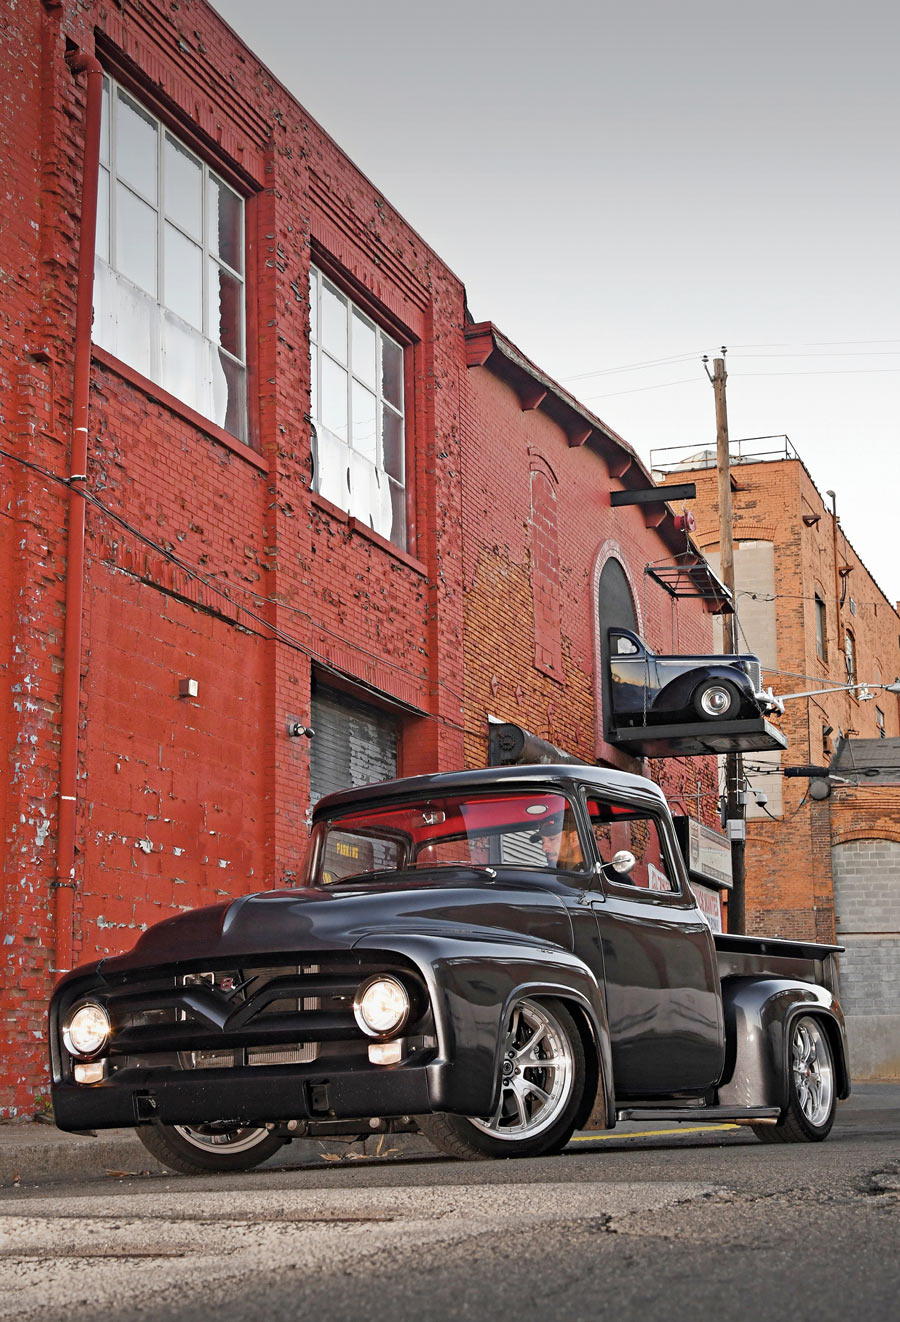 '56 F-100 in front of old red brick building